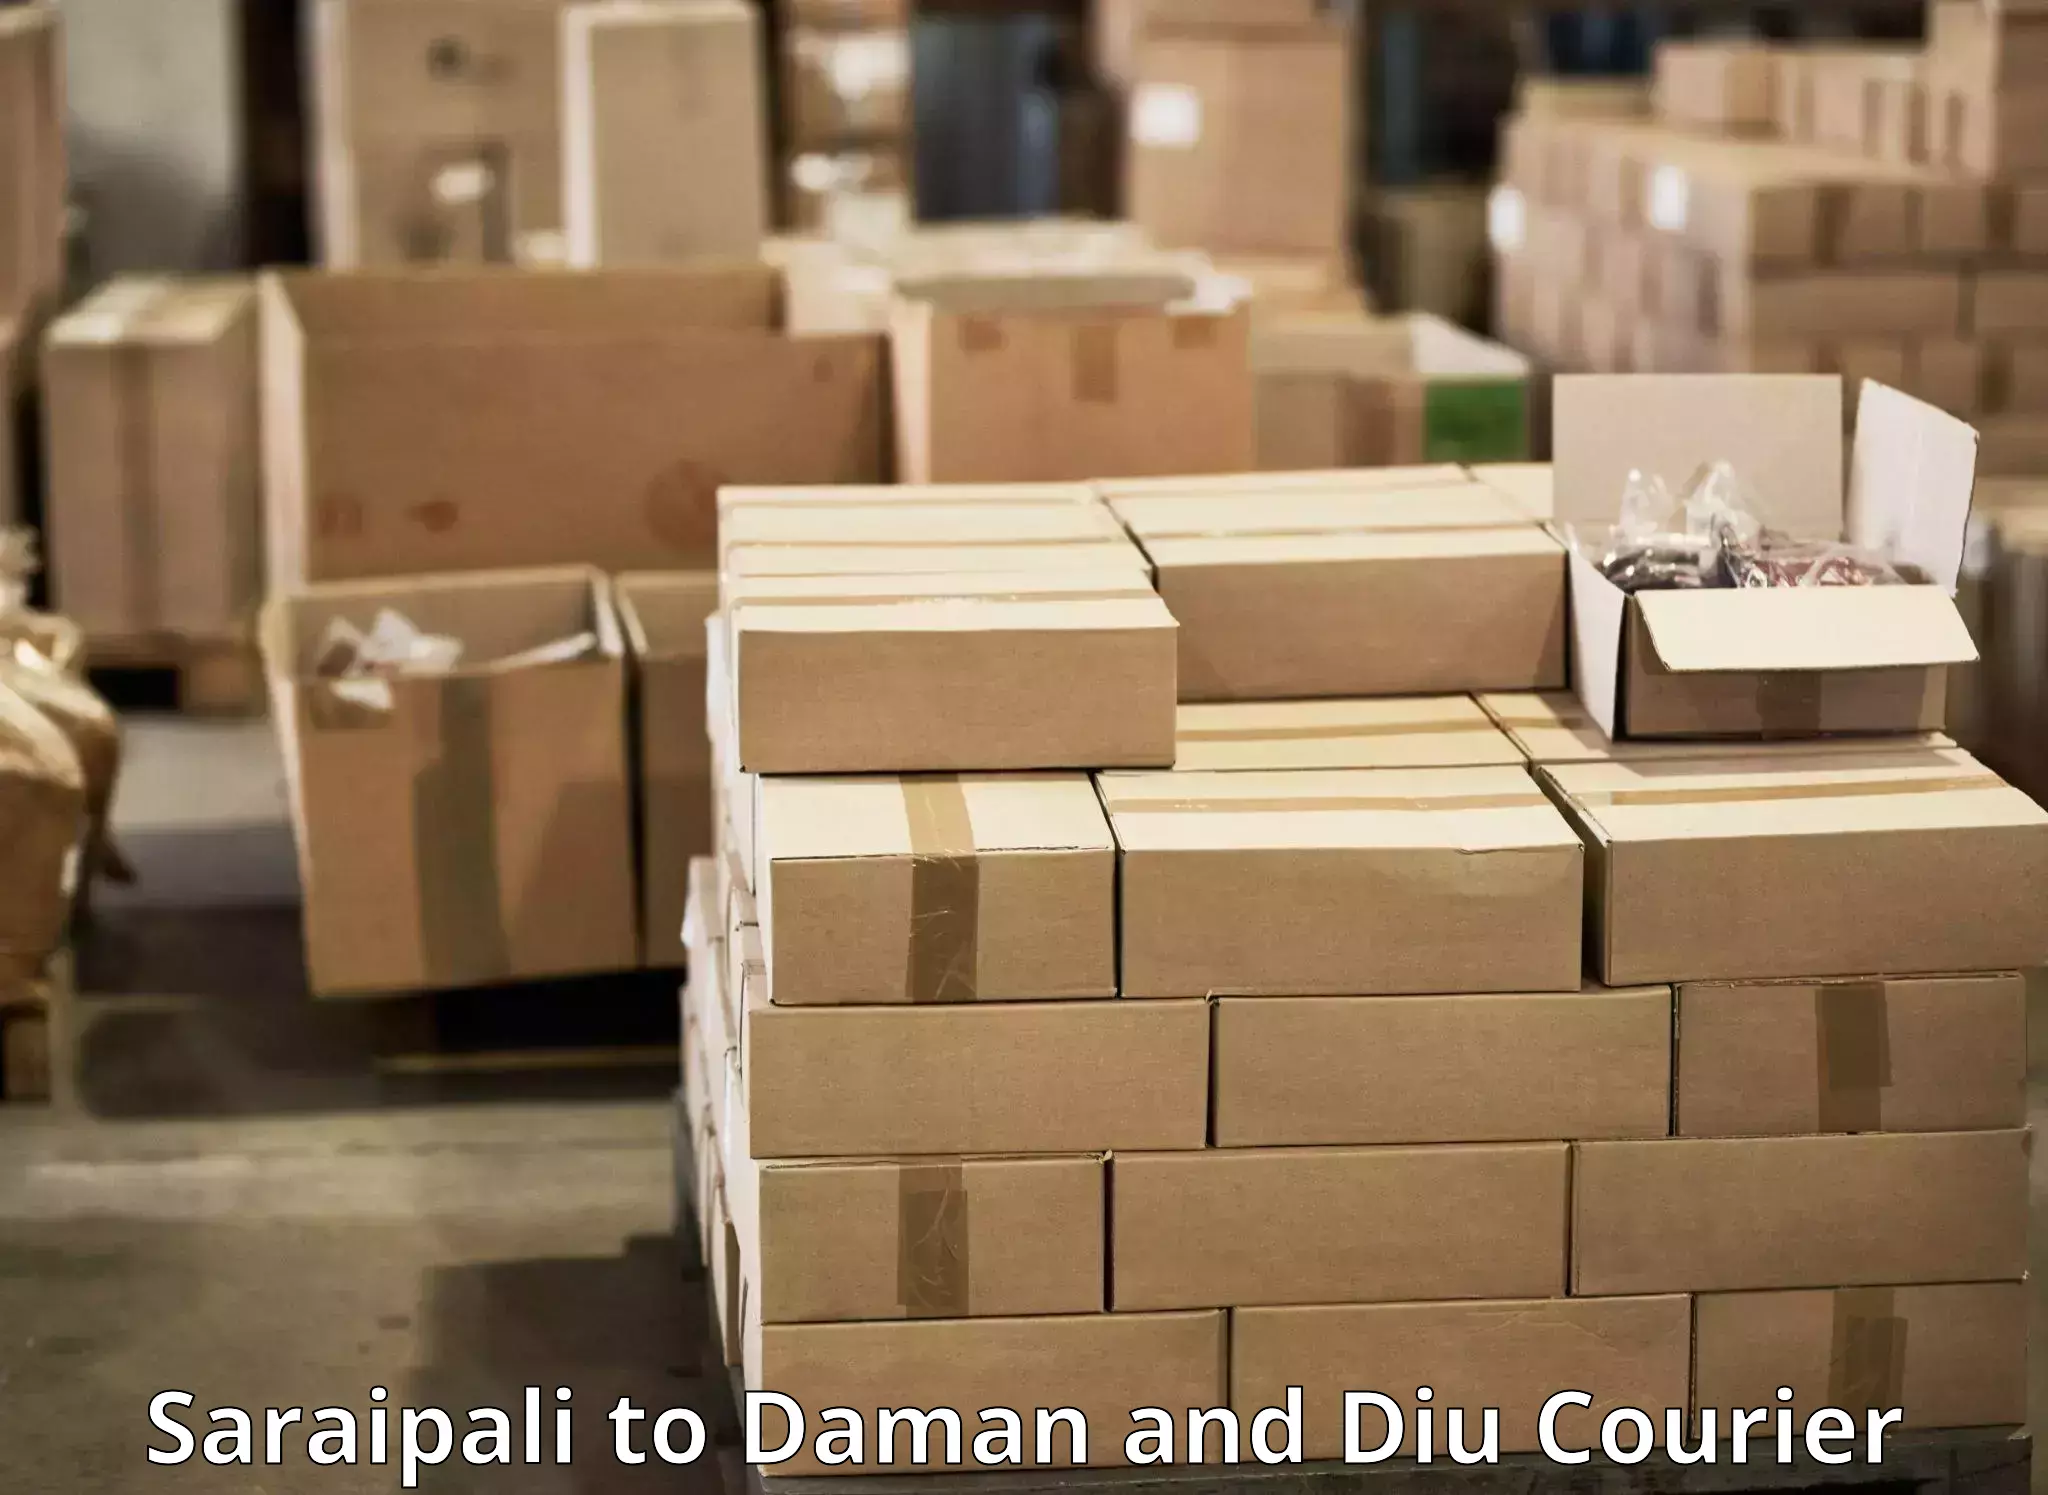 Cost-effective freight solutions Saraipali to Diu